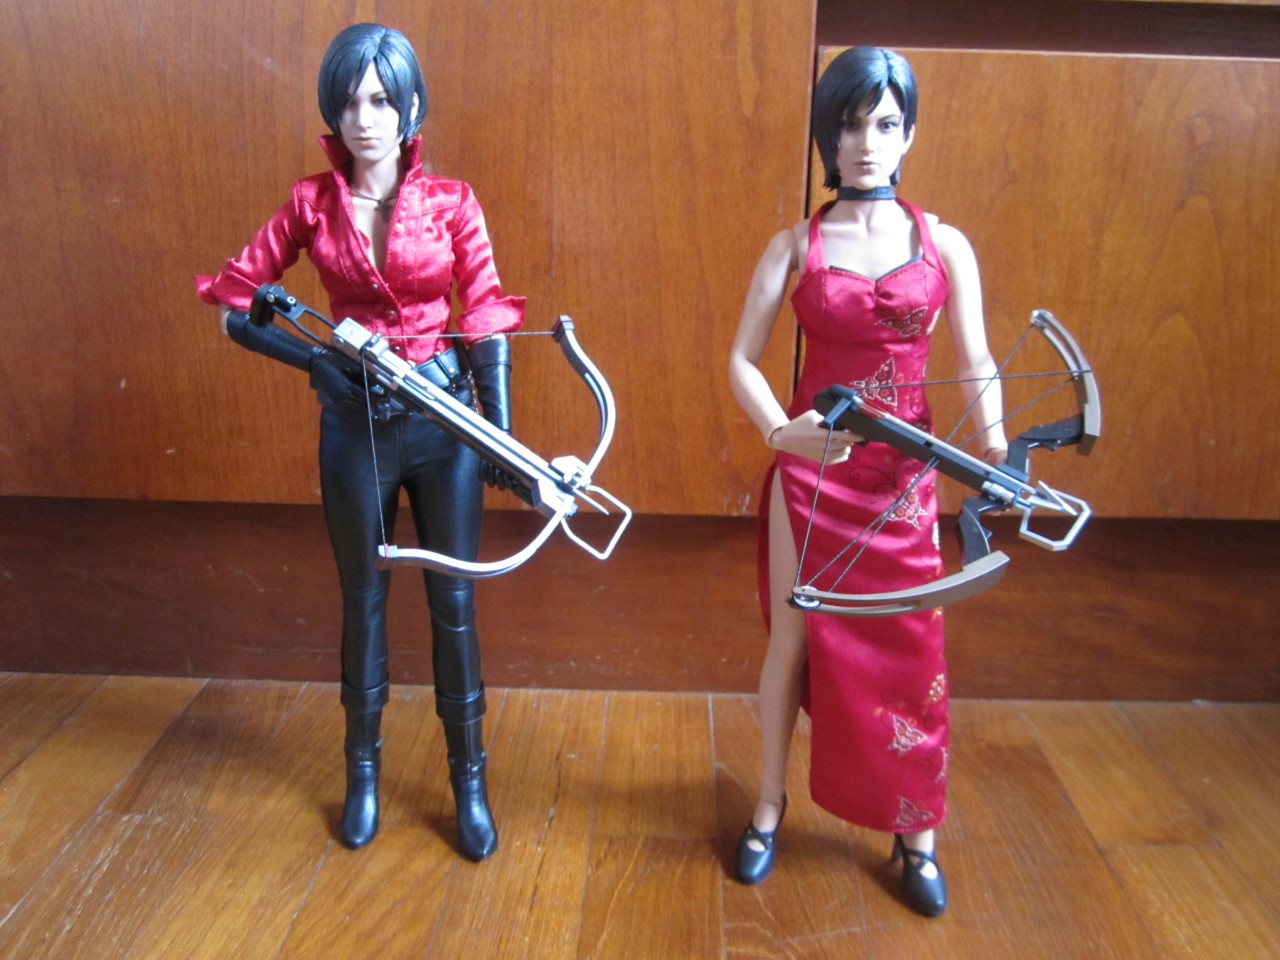 Ask Ada Wong-Kennedy — [Hot Toys RE6 Leon Unboxing]